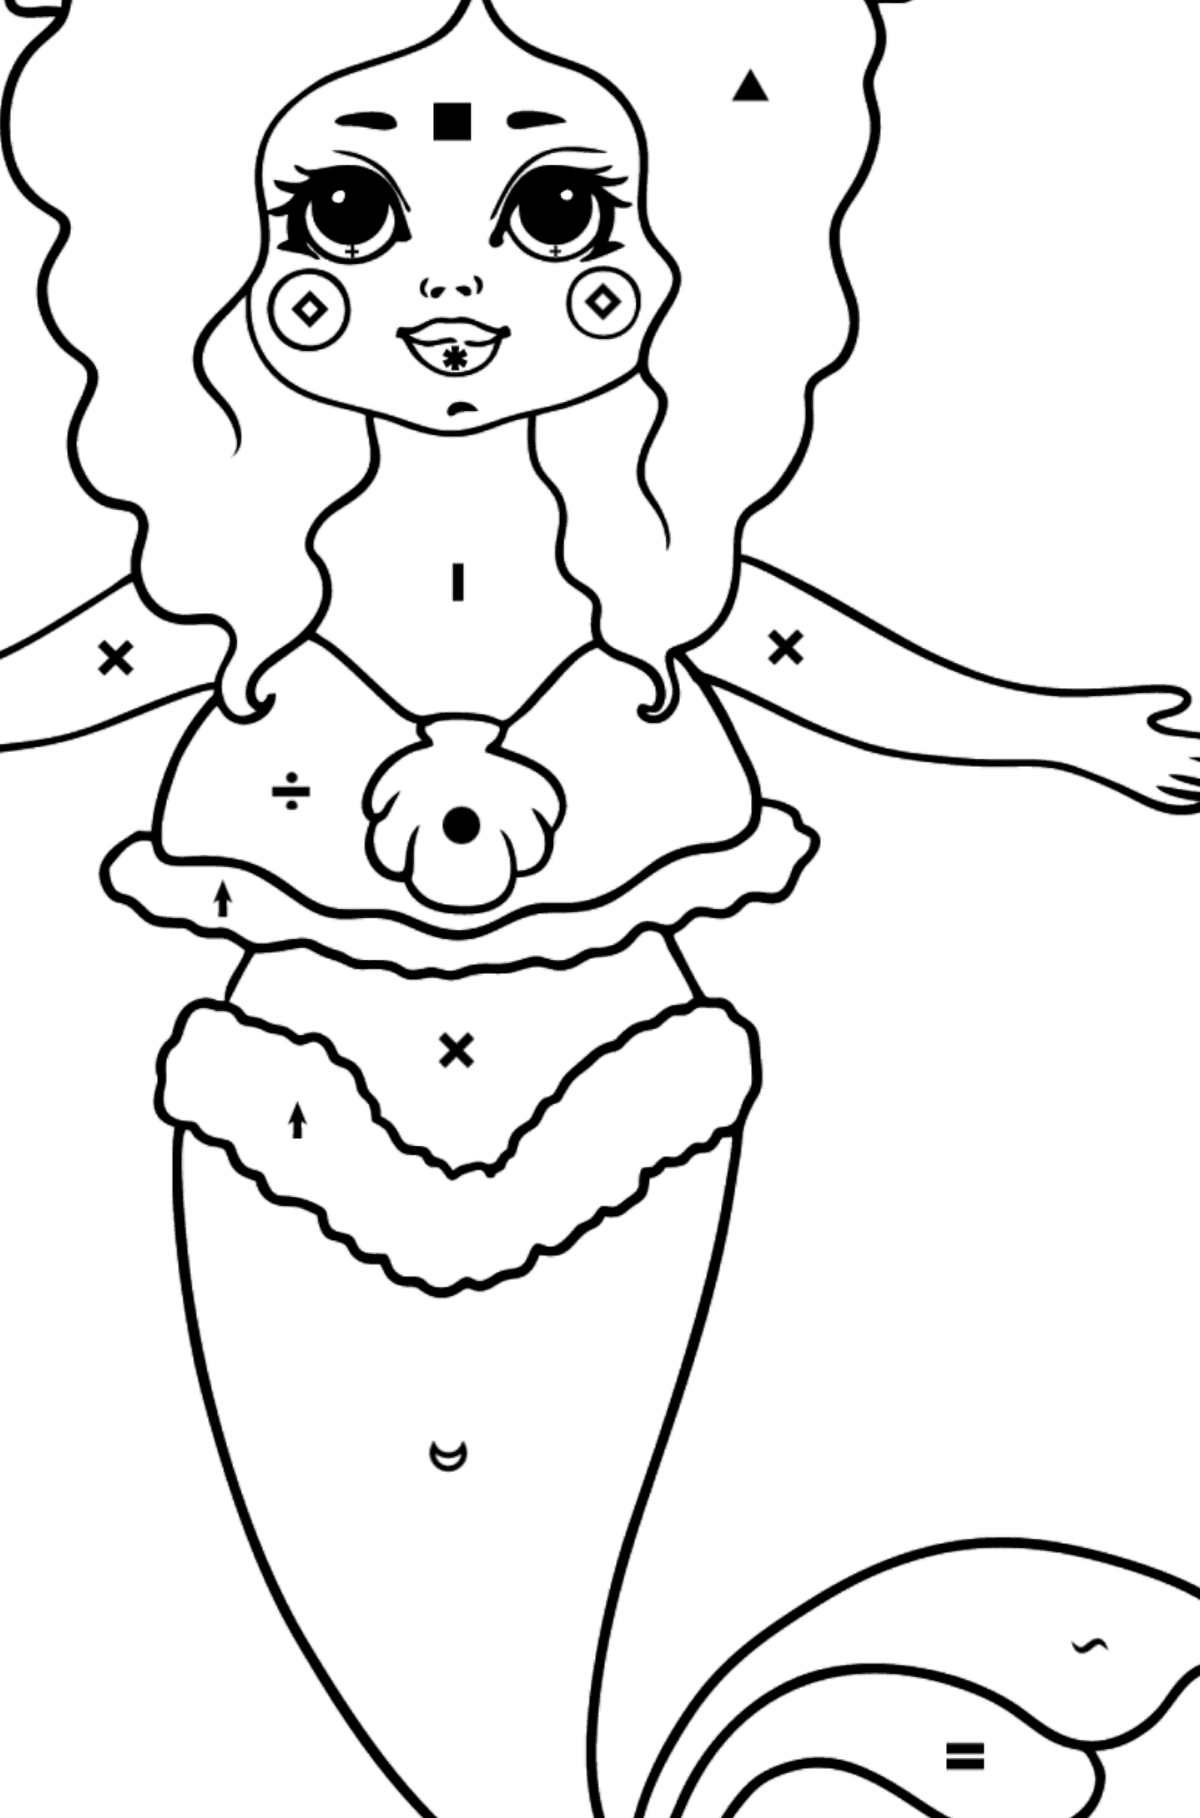 Mermaid with Yellow Tail coloring page - Coloring by Symbols for Kids